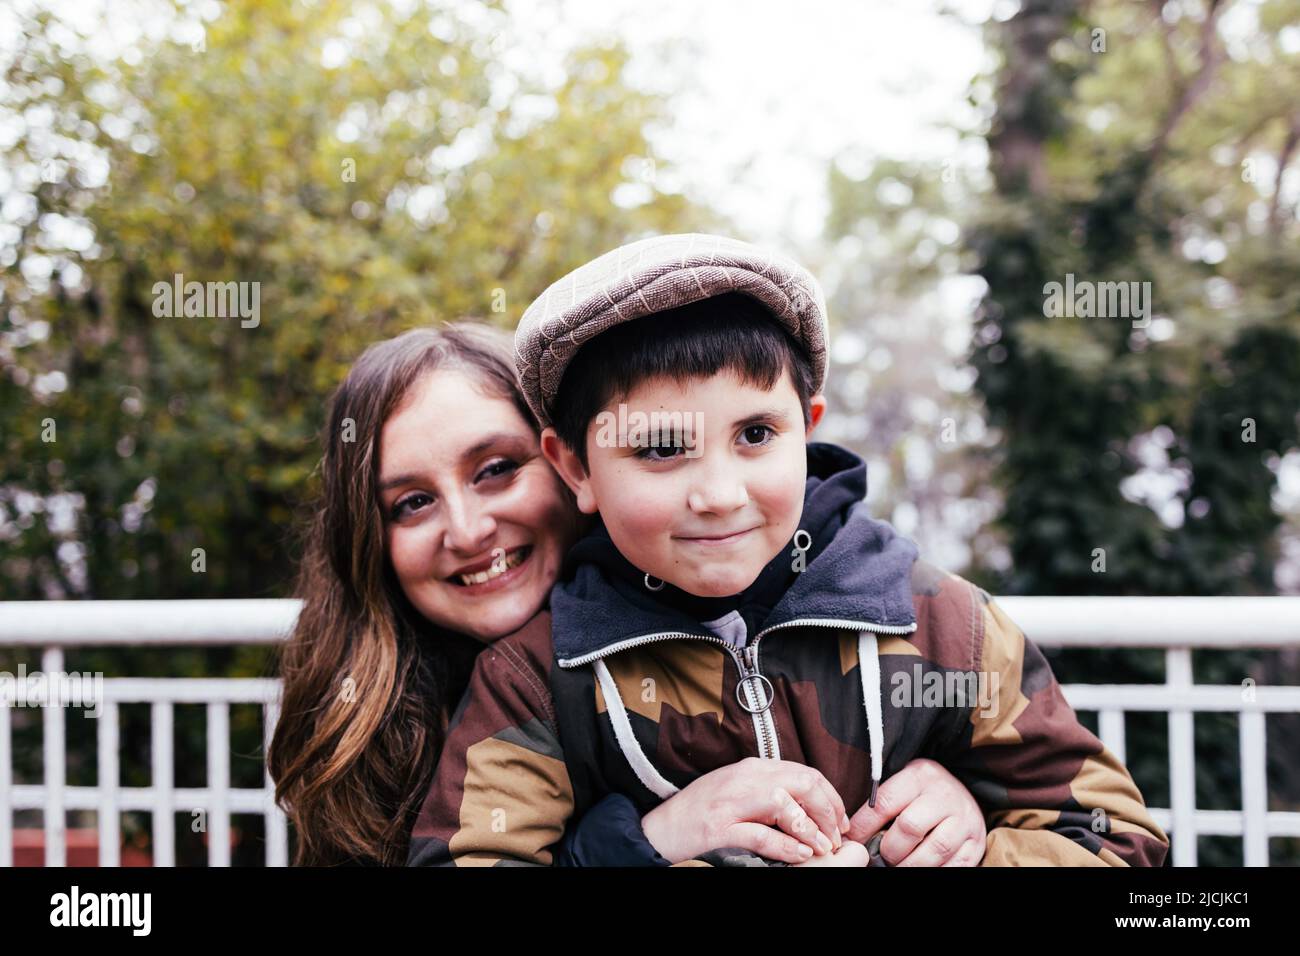 Single mother hugging her young son in the park. Single parent family Stock Photo